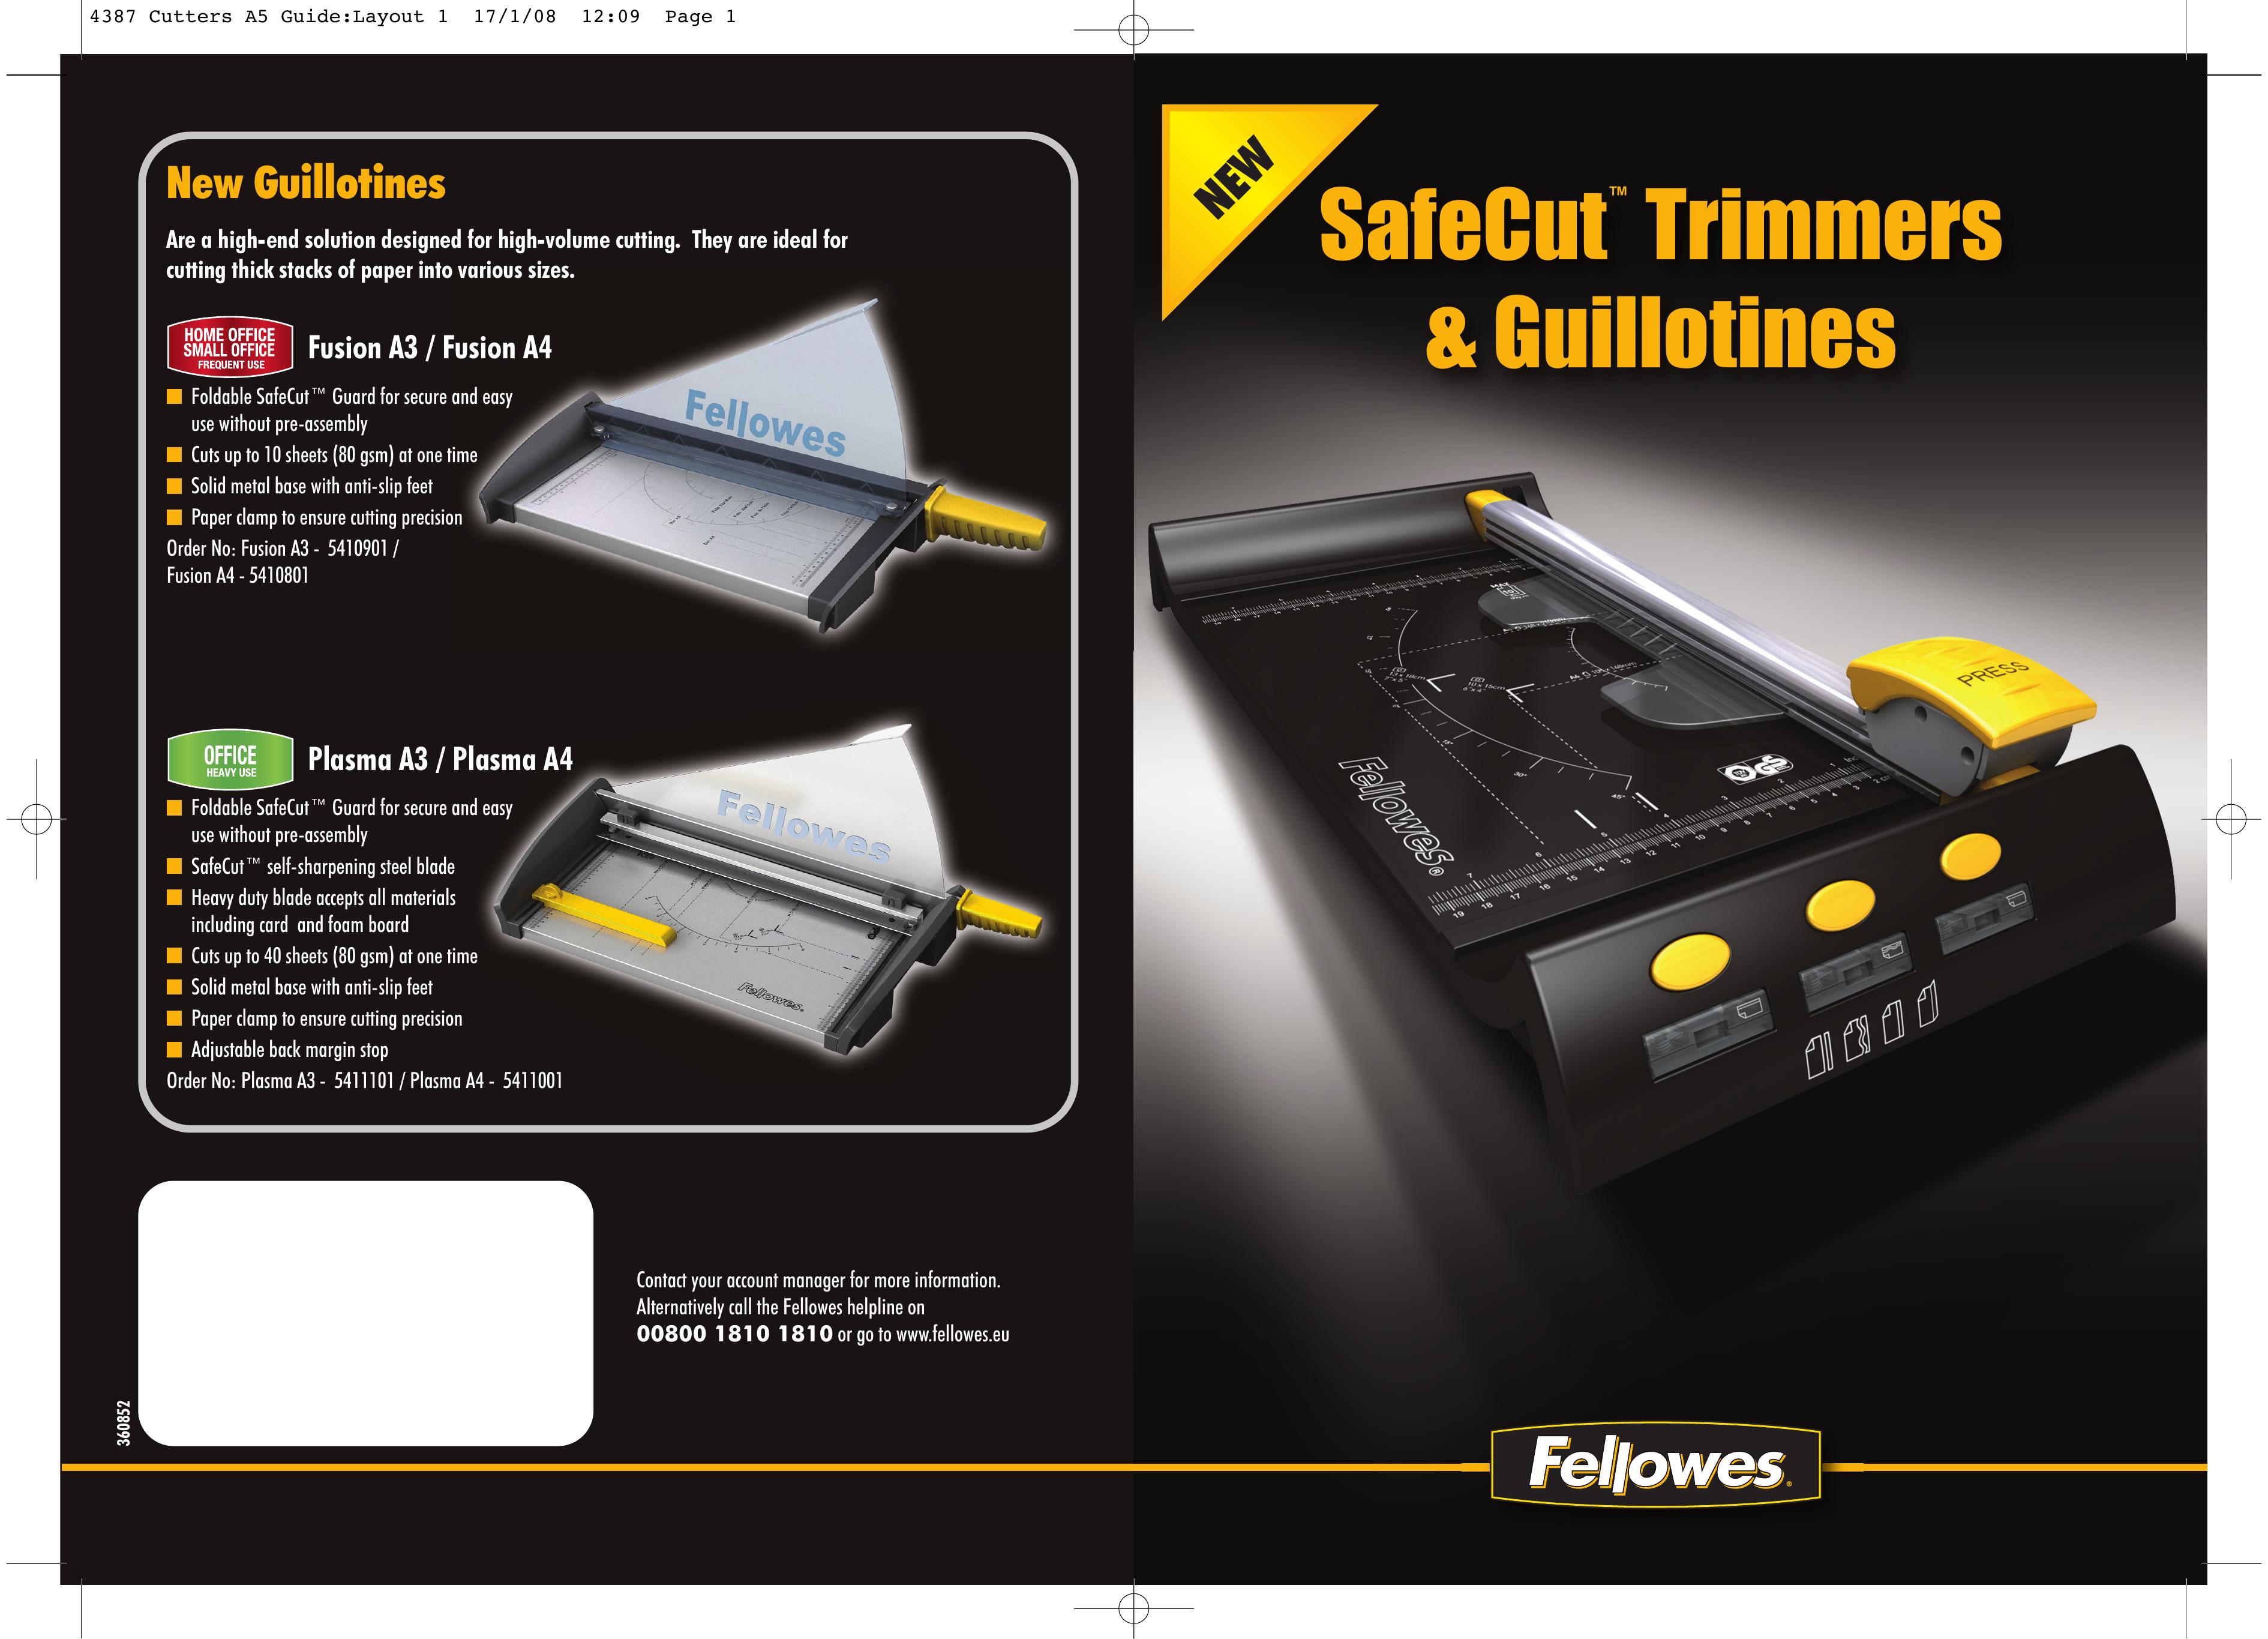 Fellowes A4 - 5410801 Trimmer User Manual